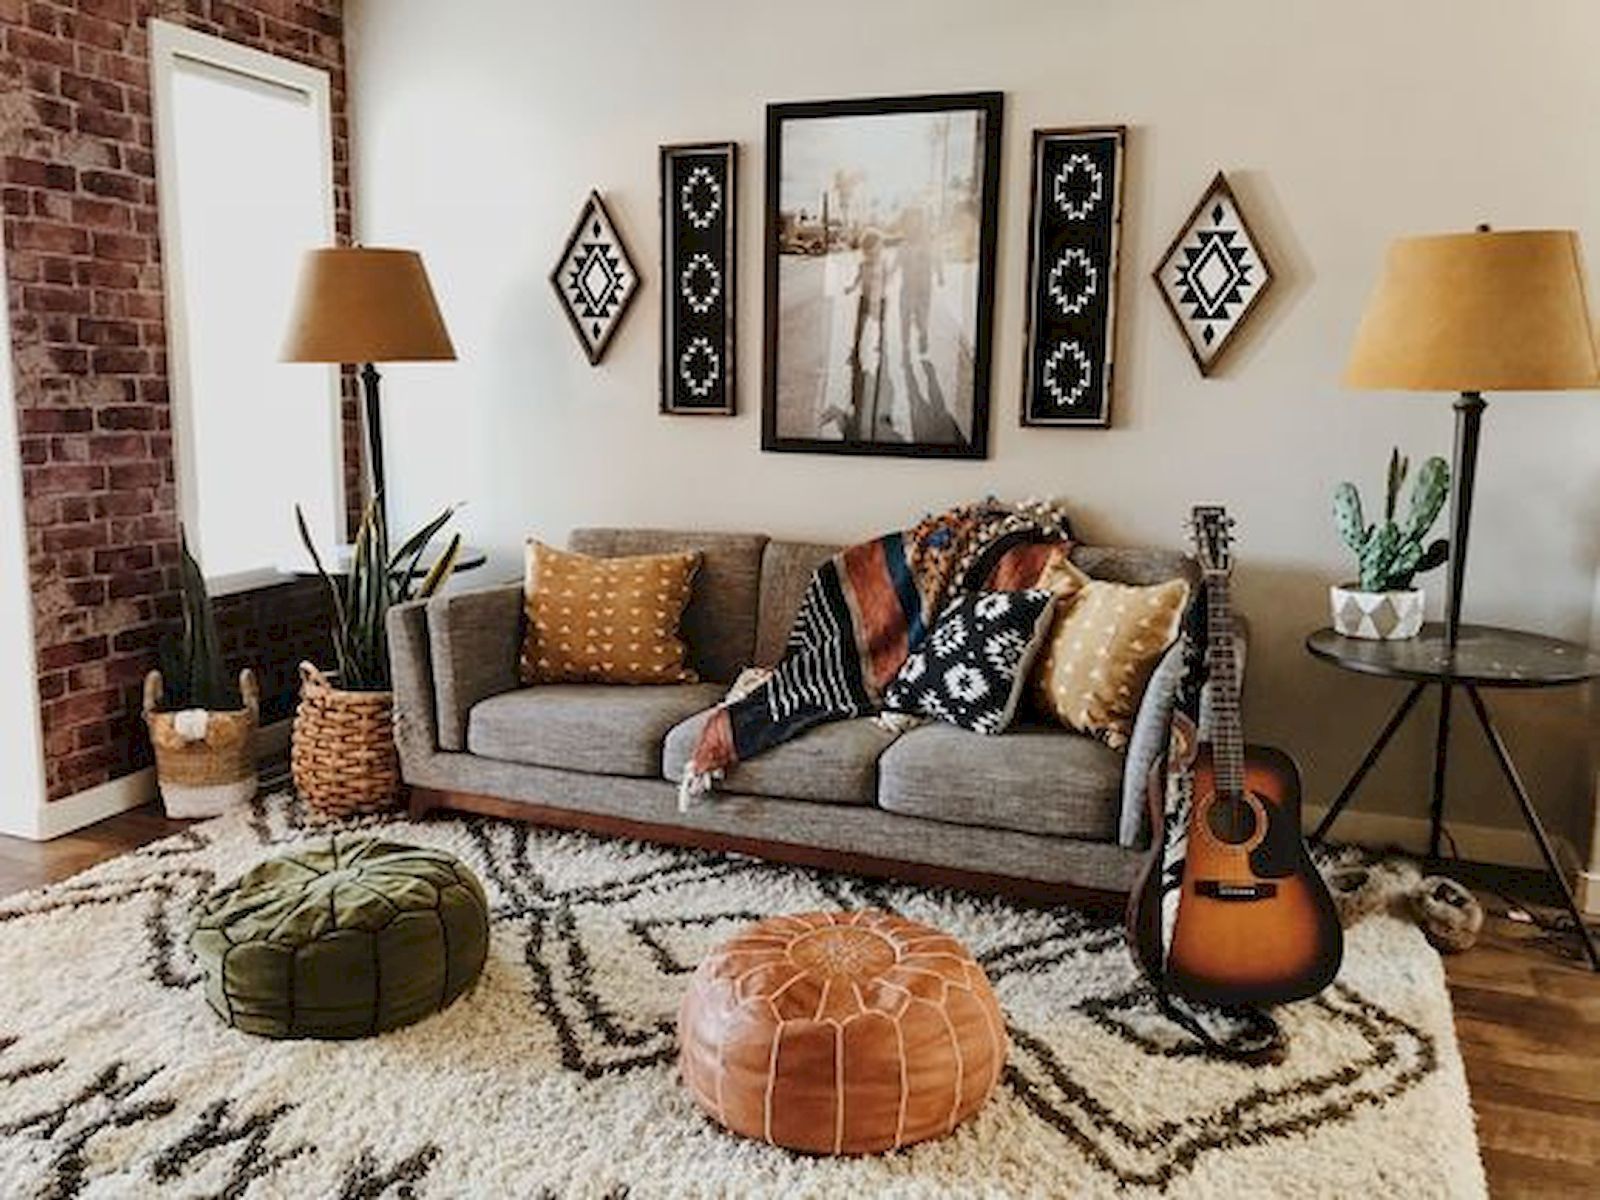 Bohemian Furniture And Decor: How To Achieve The Look